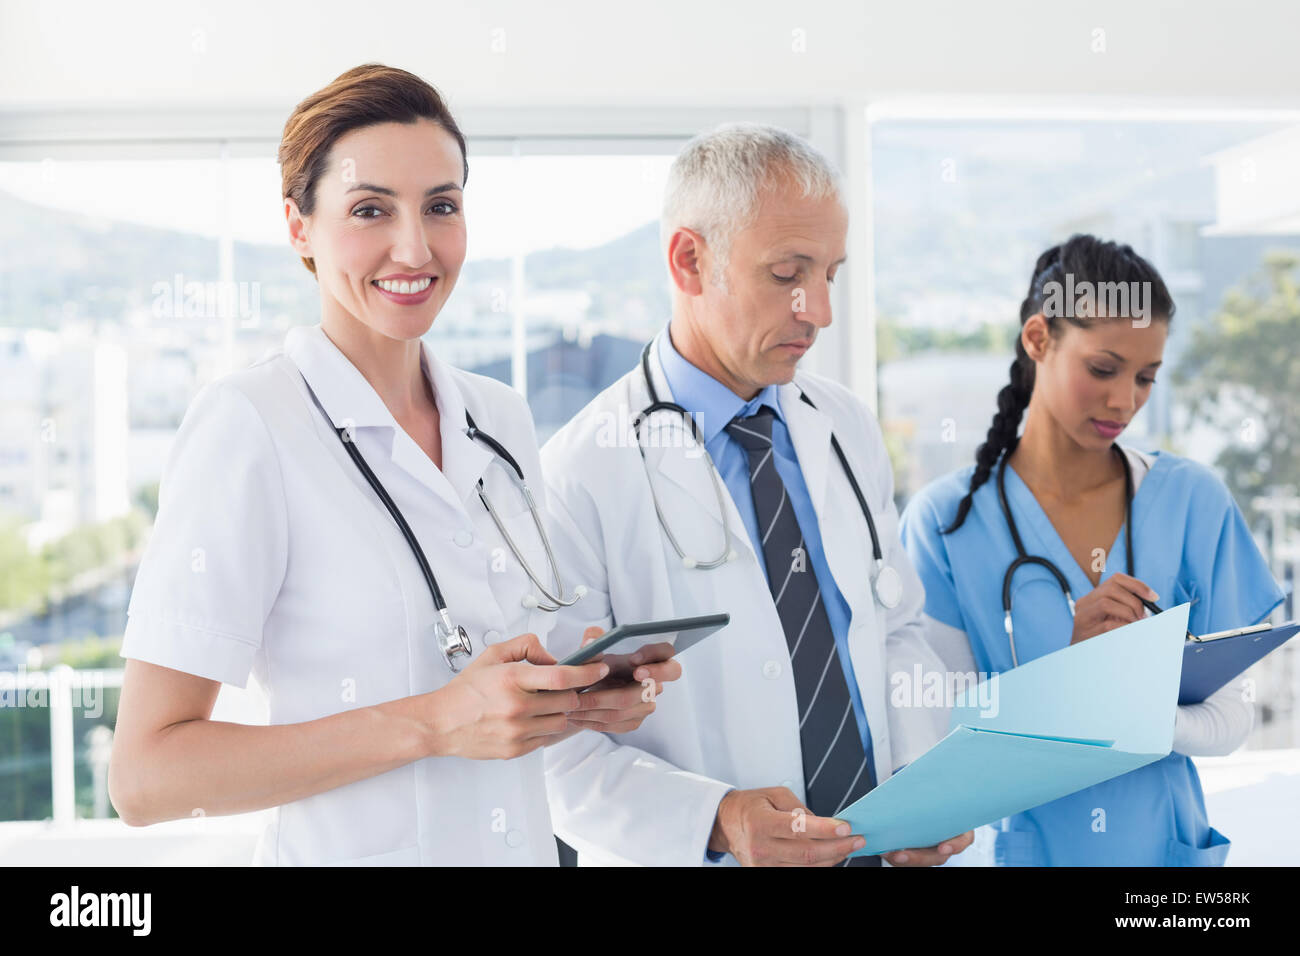 Doctors working together on patients file Stock Photo